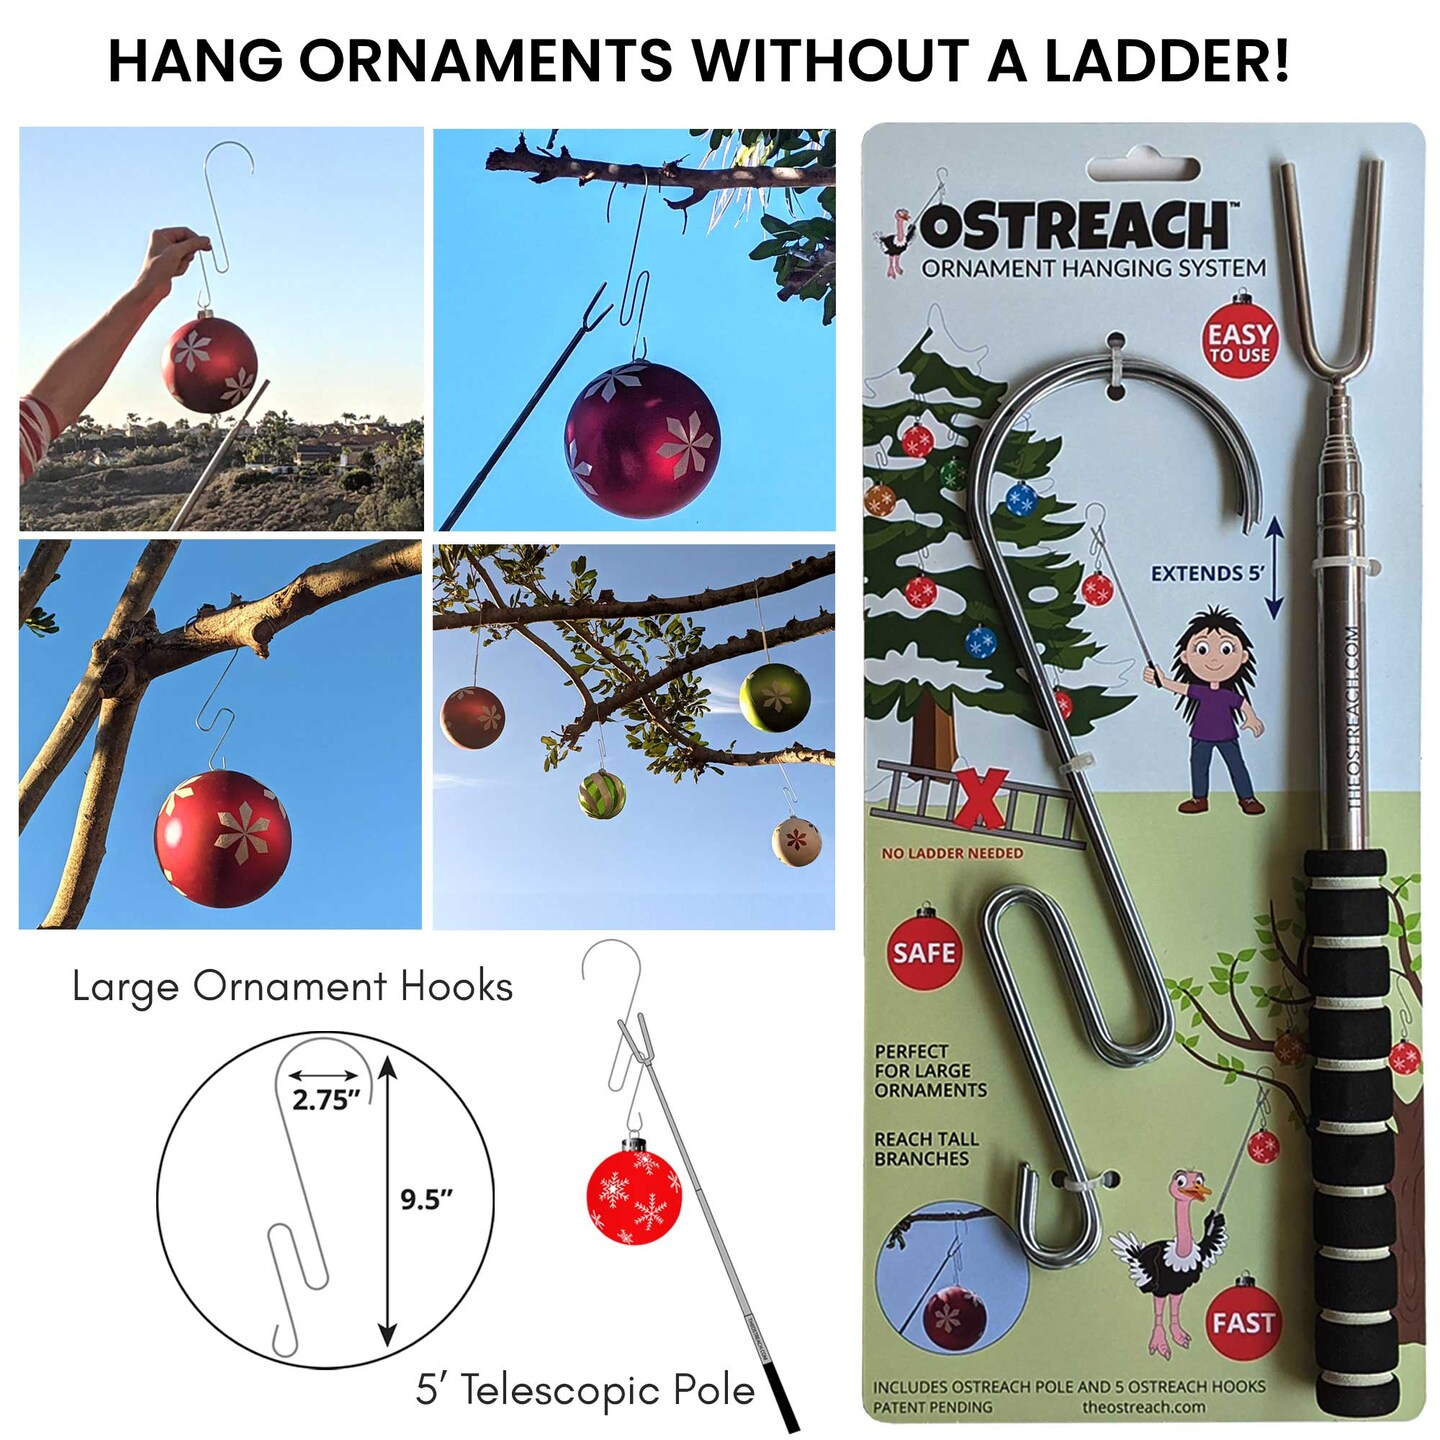 Ostreach Ornament Hanging System Ornament Hooks Ornament Hangers Christmas Tree Hangers Christmas Tree Hooks Metal Wire Ornament Hooks for Outdoor Trees